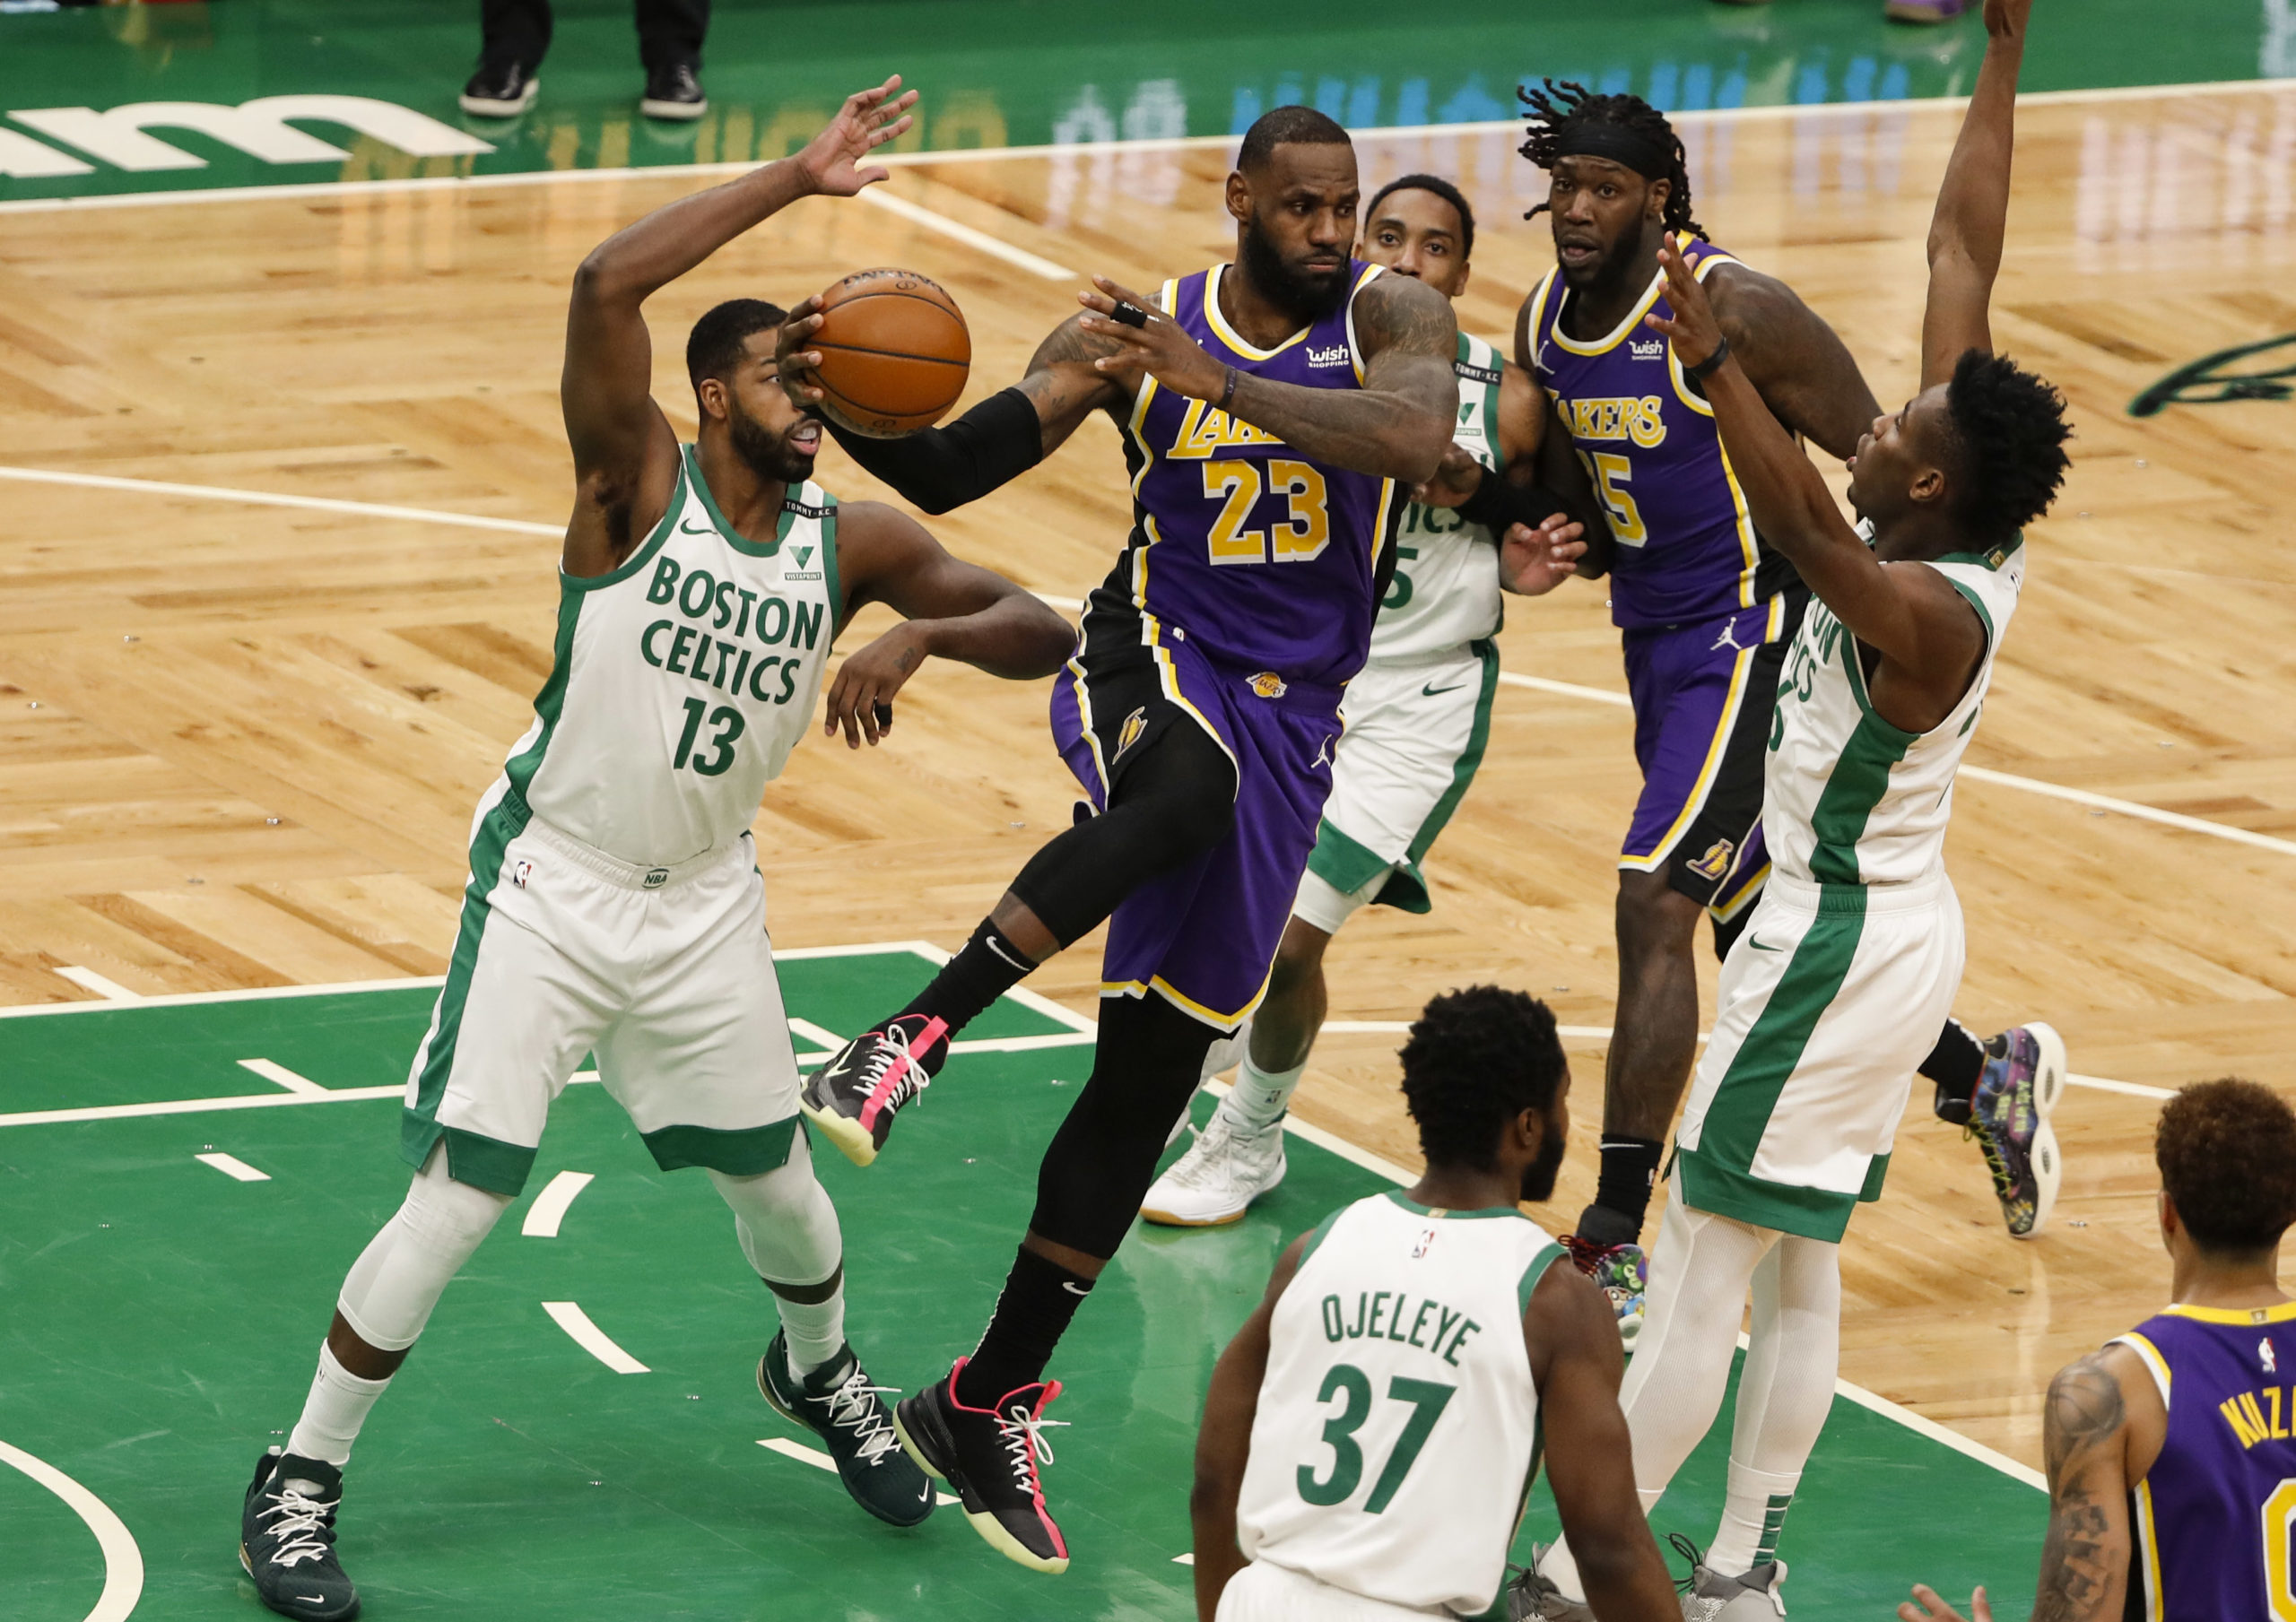 Los Angeles Lakers forward LeBron James (23) looks to pass as he is surrounded by Boston Celtics players during the fourth quarter at TD Garden.